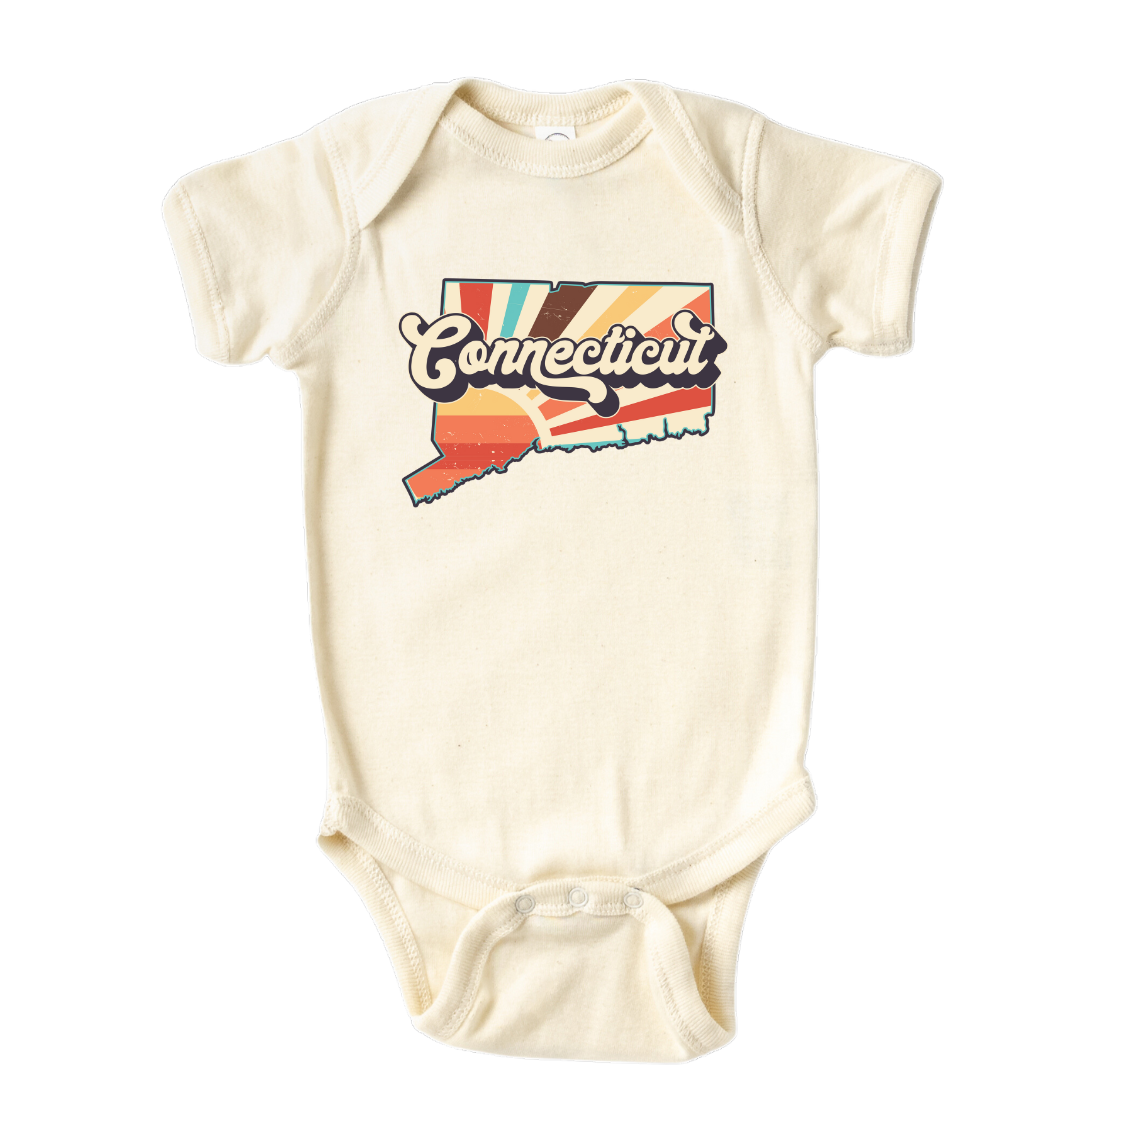 Connecticut retro design printed on baby bodysuit in natural color, front image view